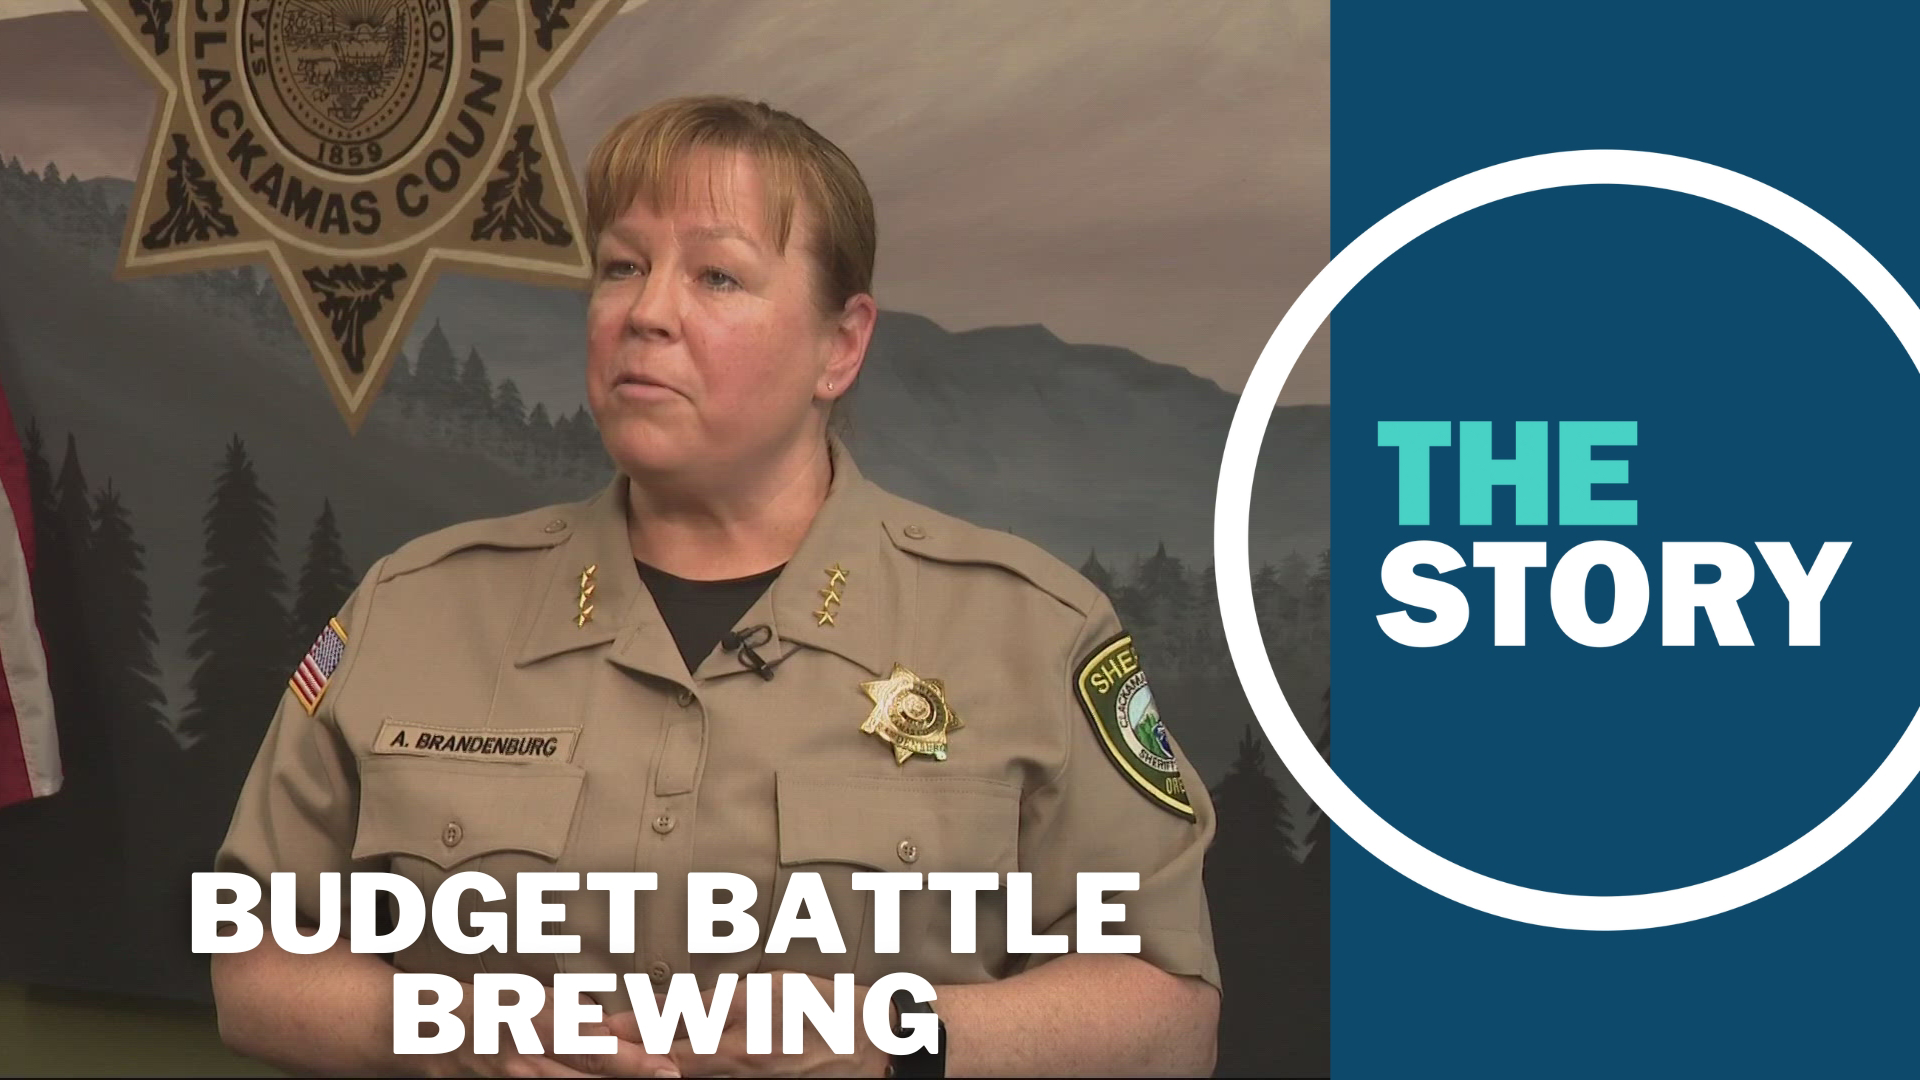 Sheriff Angela Brandenburg says the county is making her department take a $5 million cut, but won't accept her proposed budget.